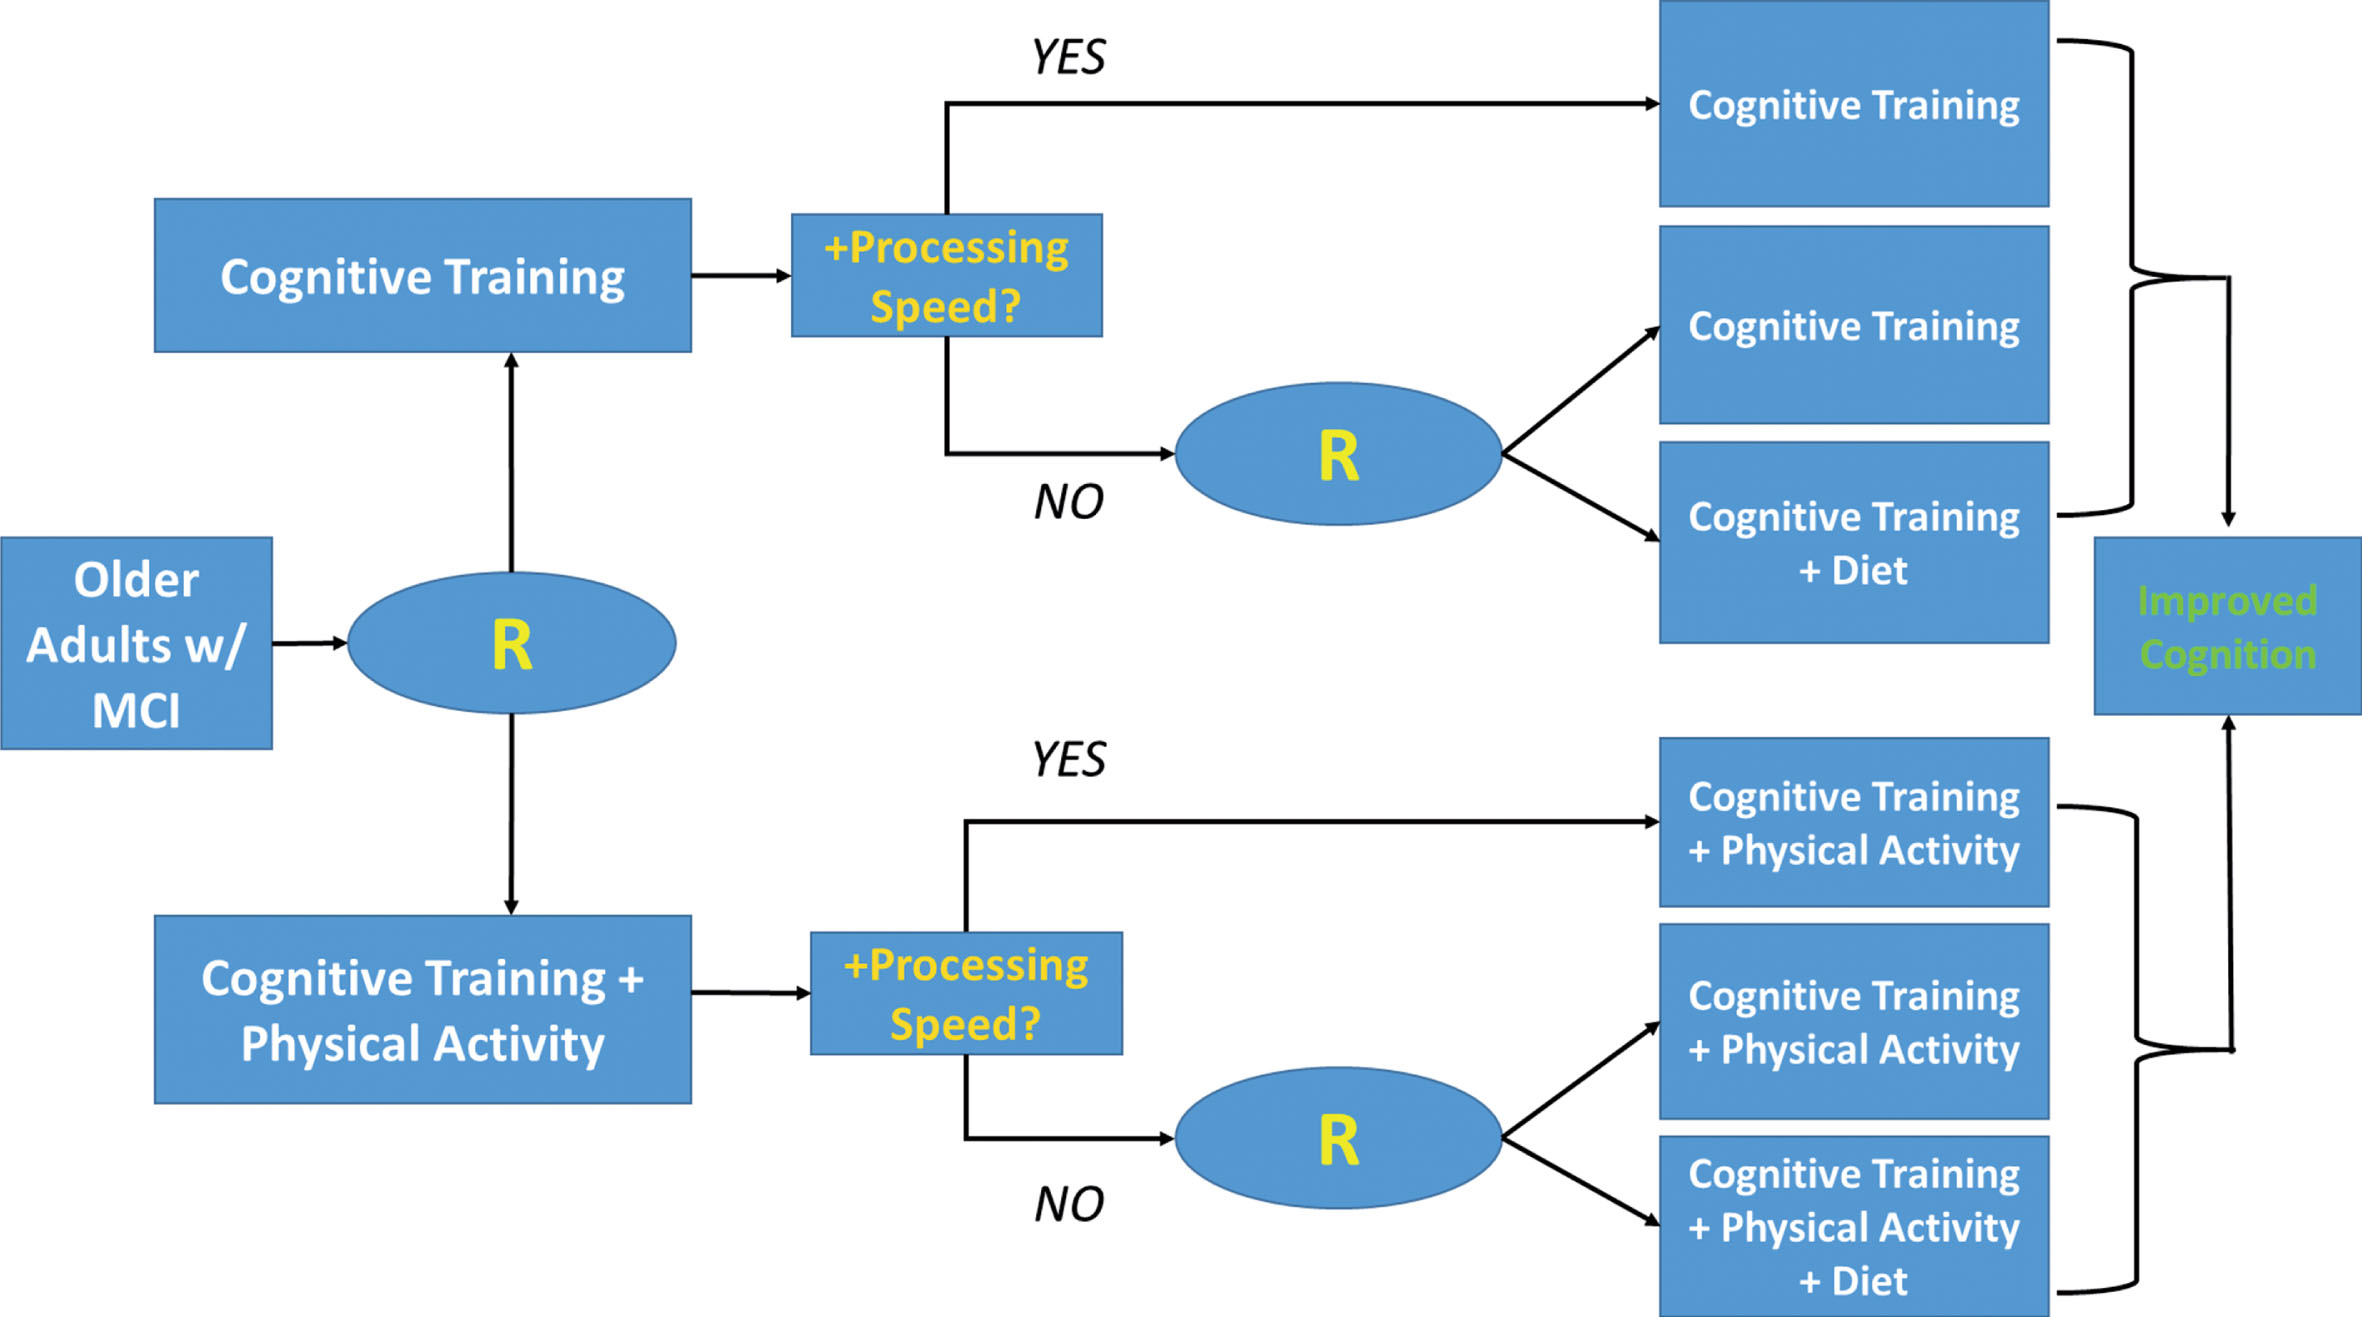 Example of a SMART-based design among older adults with mild cognitive impairment (MCI). In this example, participants are initially randomized to either cognitive training or a combined cognitive and physical activity program, that may augment neuroplasticity. The tailoring variable used to determine secondary randomization is improvements on a brief measure of processing speed, which has been associated with intervention responsivity in other trial settings. Secondary randomization among non-responders introduces an additional treatment augmenting metabolic and inflammatory function, dietary modification, in order to determine if some individuals are able to achieve improved cognitive outcomes with additional treatment.